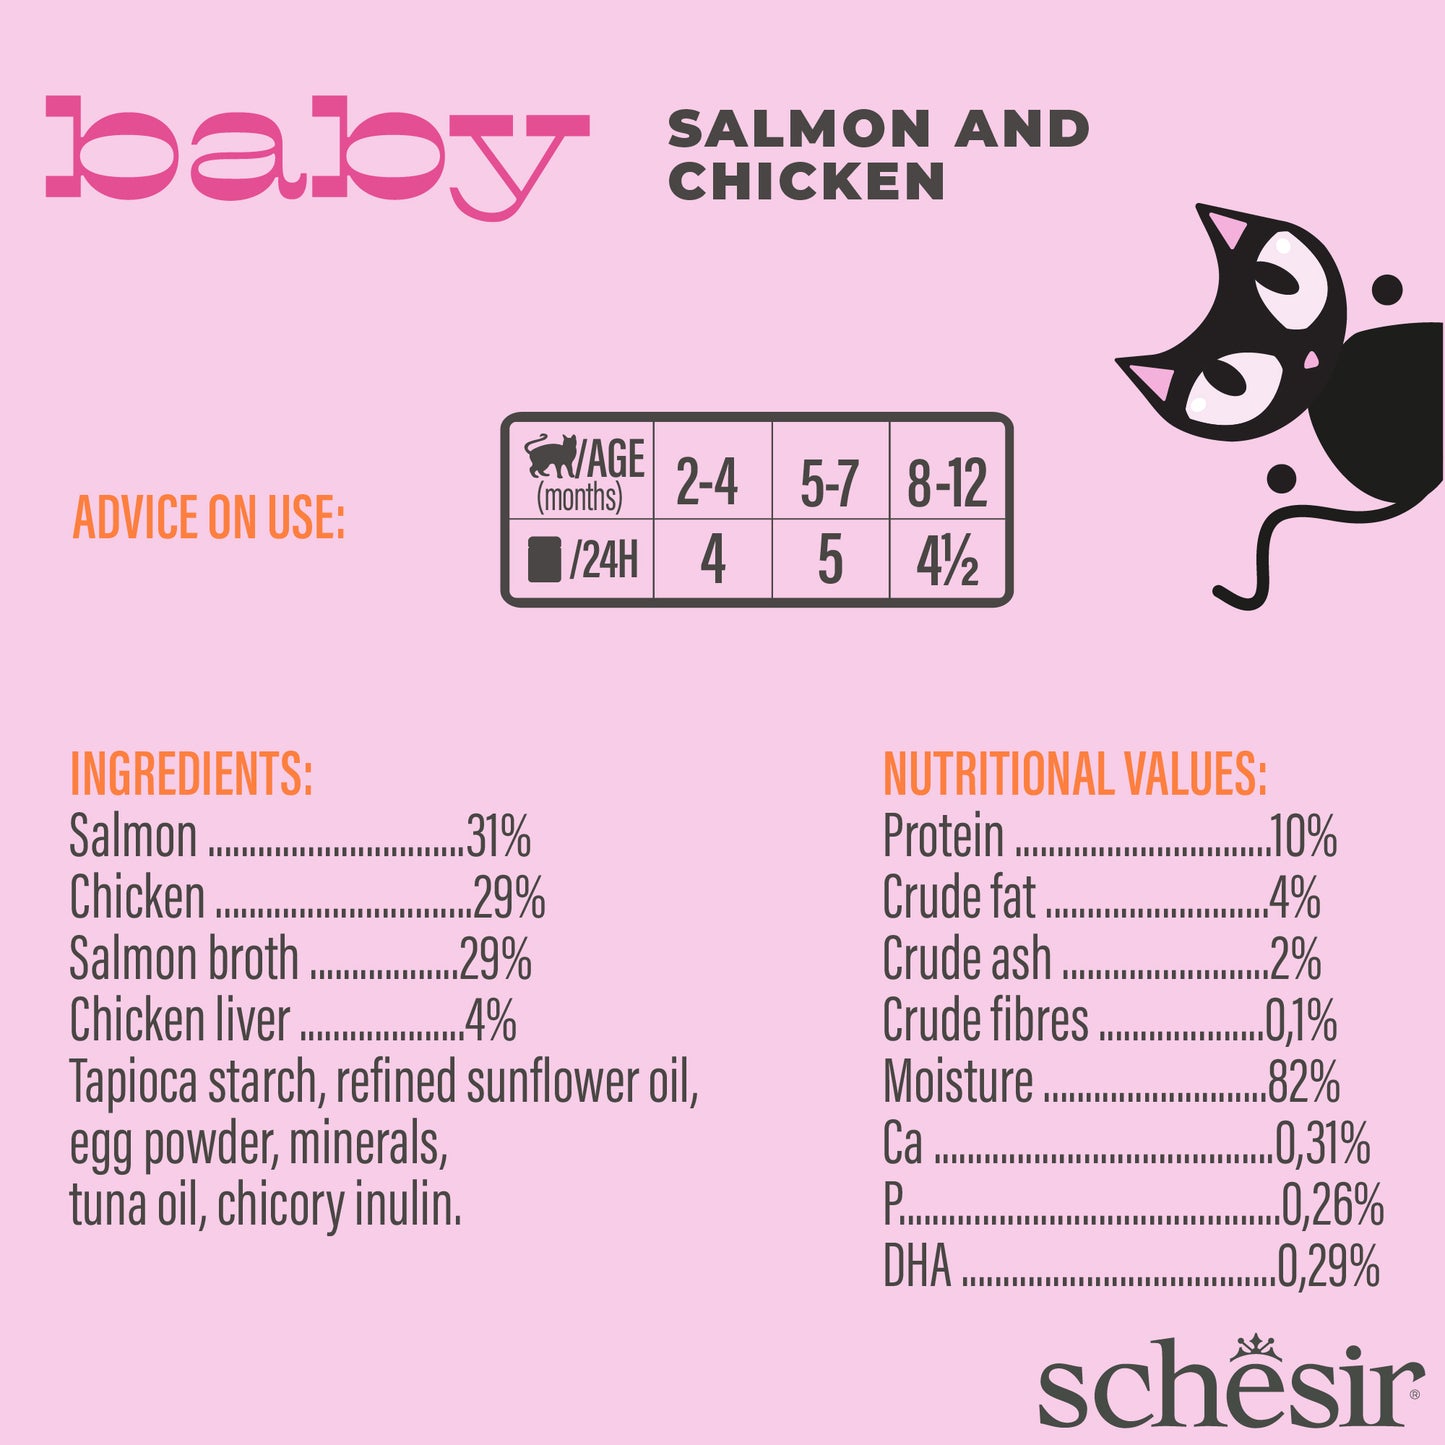 [5% OFF NNC Members] Schesir Baby Velvet Mousse - Salmon and Chicken, 70g